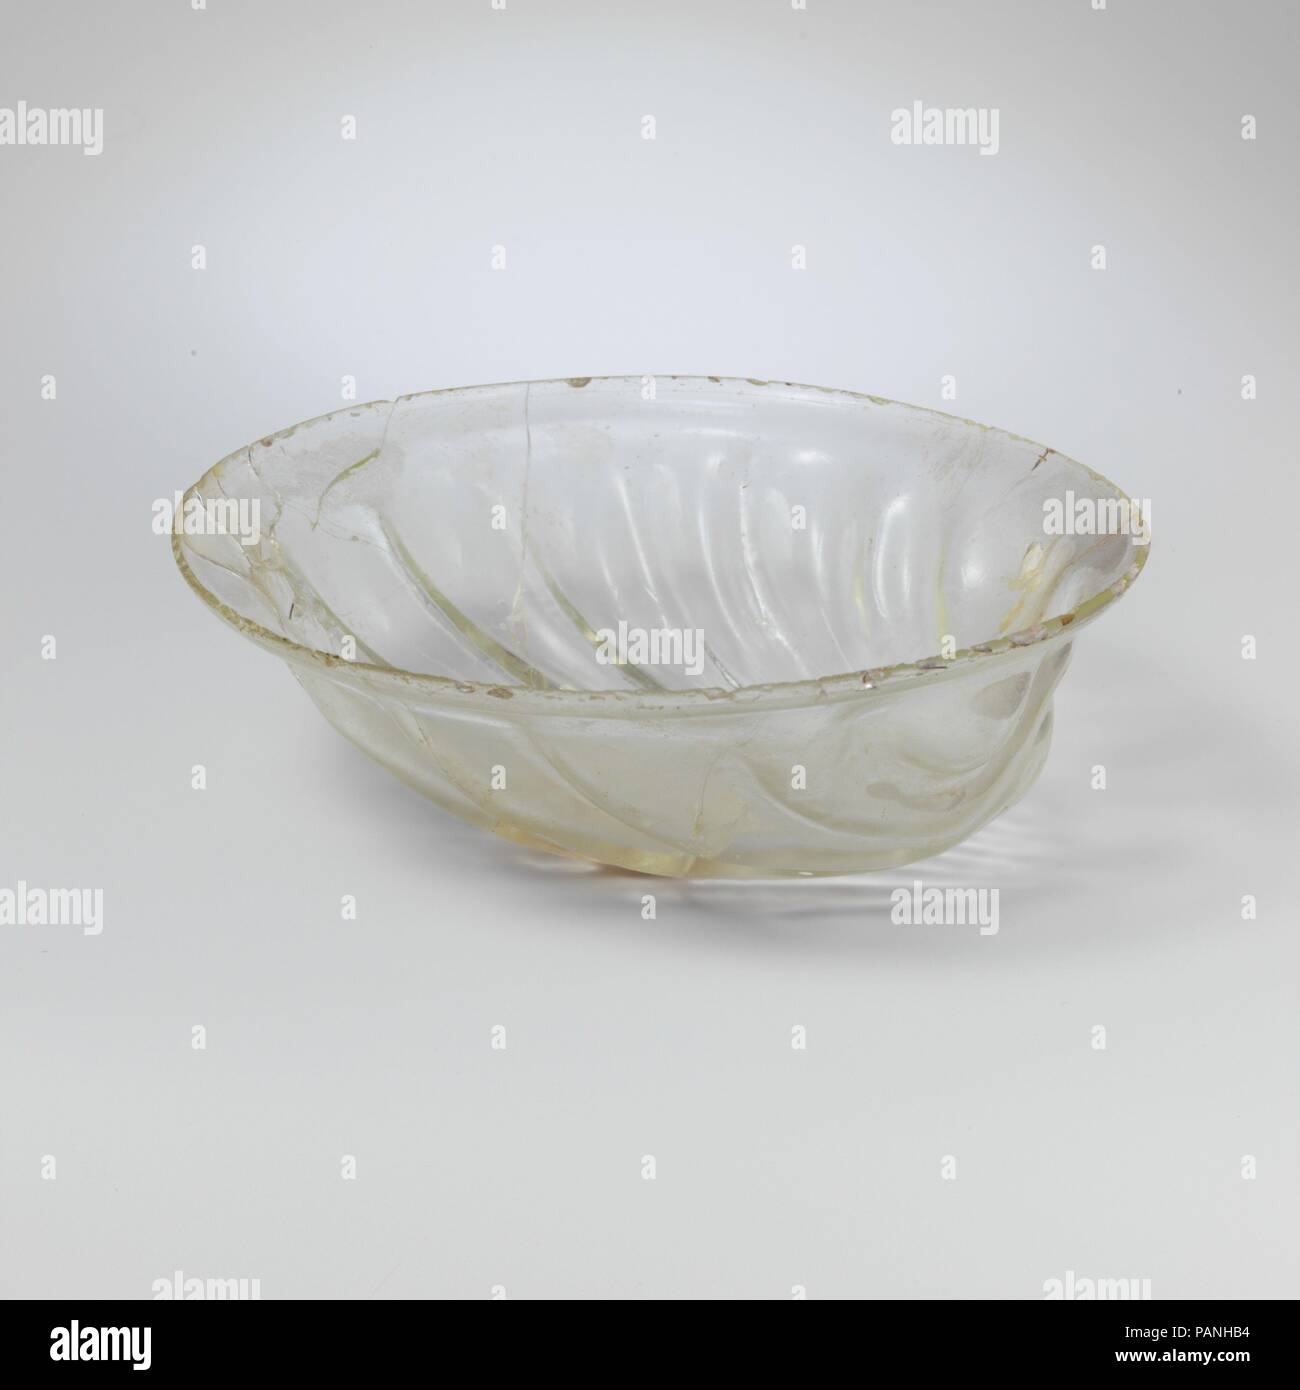 Glass bowl in the form of a shell. Culture: Roman. Dimensions: Diam.: 5 in. (12.7 cm). Date: 1st half of 4th century A.D..  Colorless with pale green tinge.  Flaring, knocked-off rim with shallow S-shaped collar below; body with circular circumference and rounded bottom.  Body formed into the shape of a marine bivalve mollusc (scallop) in relief with eleven ribs radiating from a deep ocellus or umbone in a fan pattern ; ribs become broader and have rounded ends below collar around rim; the ocellus is flanked to either side by a hemispherical  bulge. Below the rim is a faint wheel-abraded line. Stock Photo